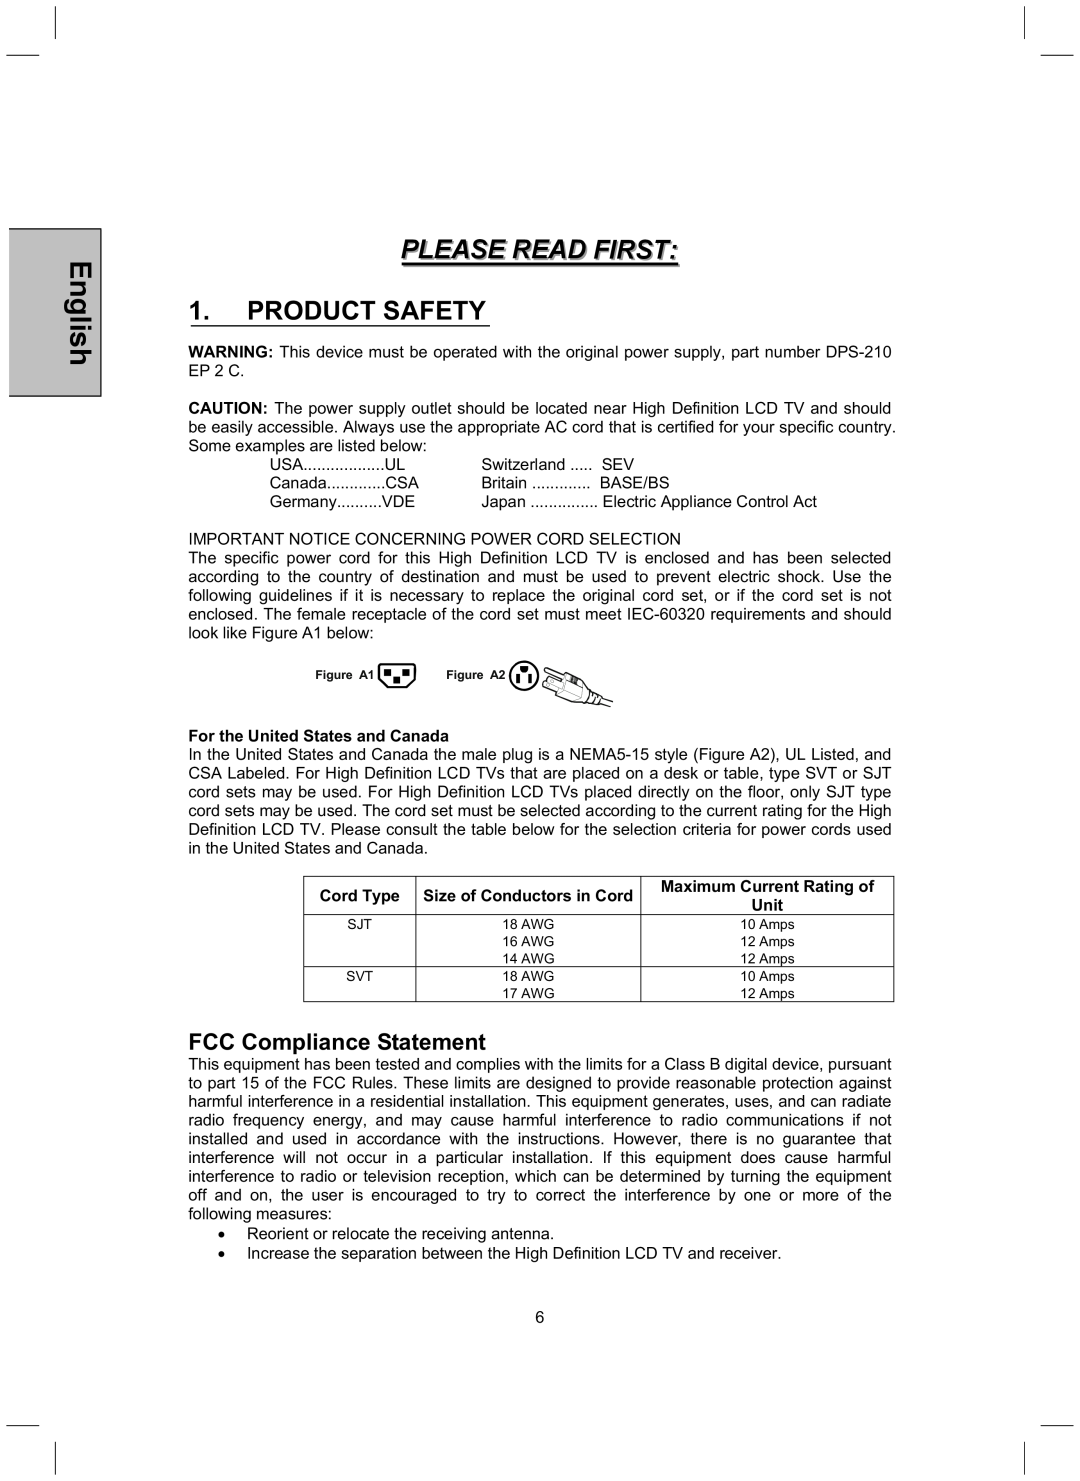 Westinghouse TX-52H480S user manual Product Safety, FCC Compliance Statement, English, Please Read First 